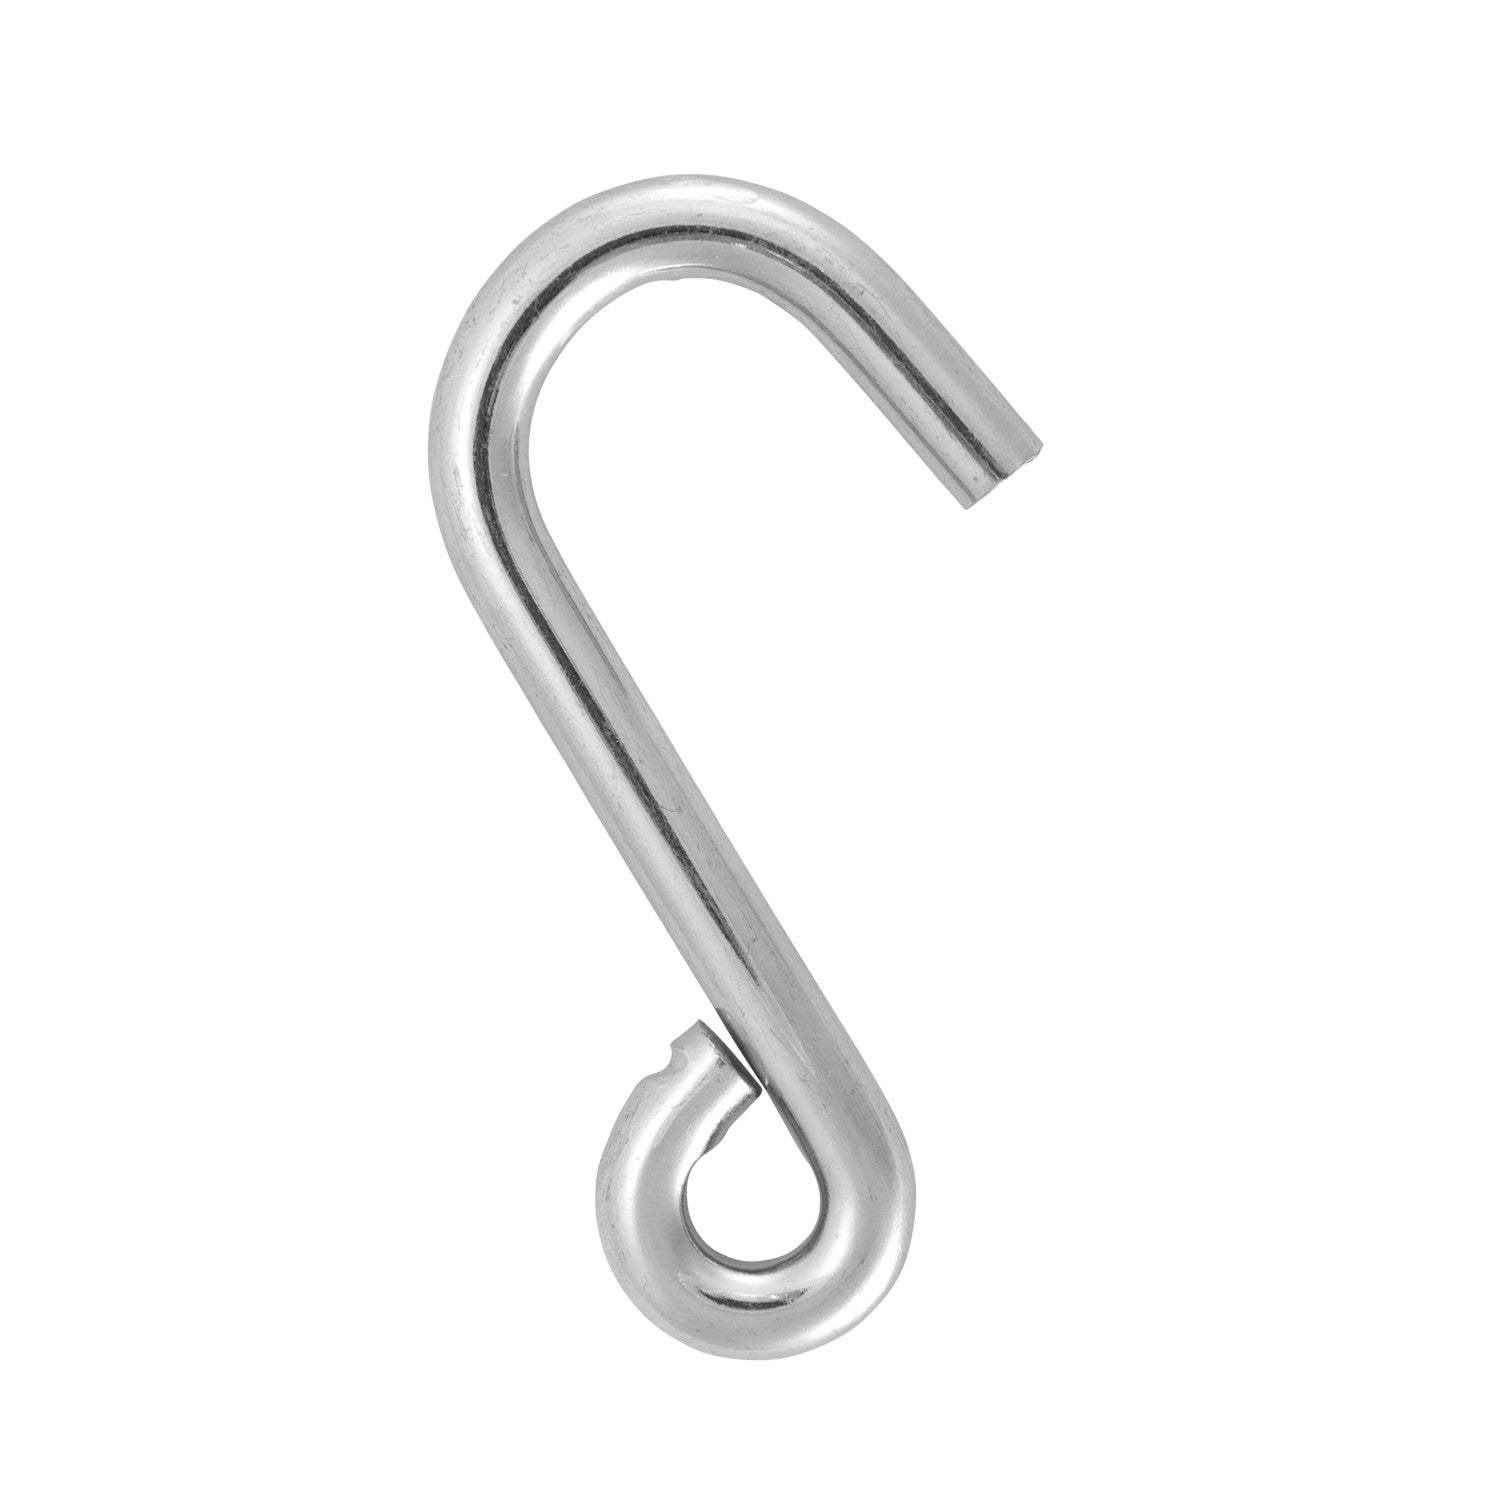 Everbilt 1/16 in. x 3/4 in. Stainless Steel S-Hook 823751 - The